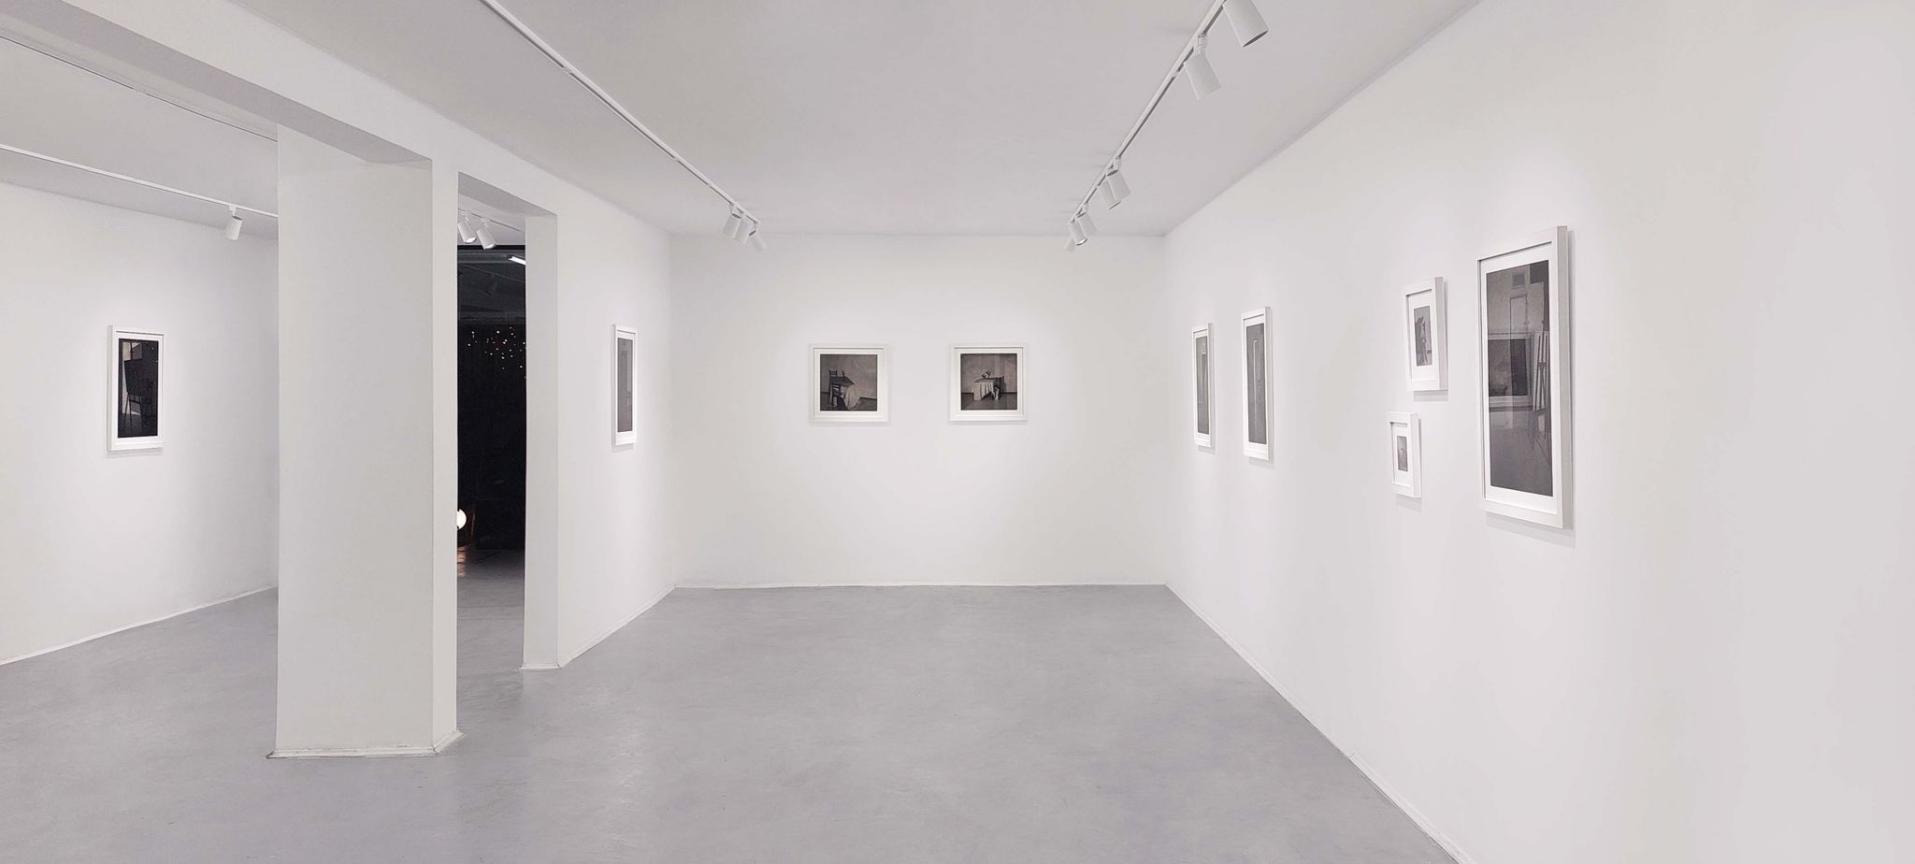 SILENCE AND TRANQUILITY/ Installation view	 - ZAHRA REZADOOST